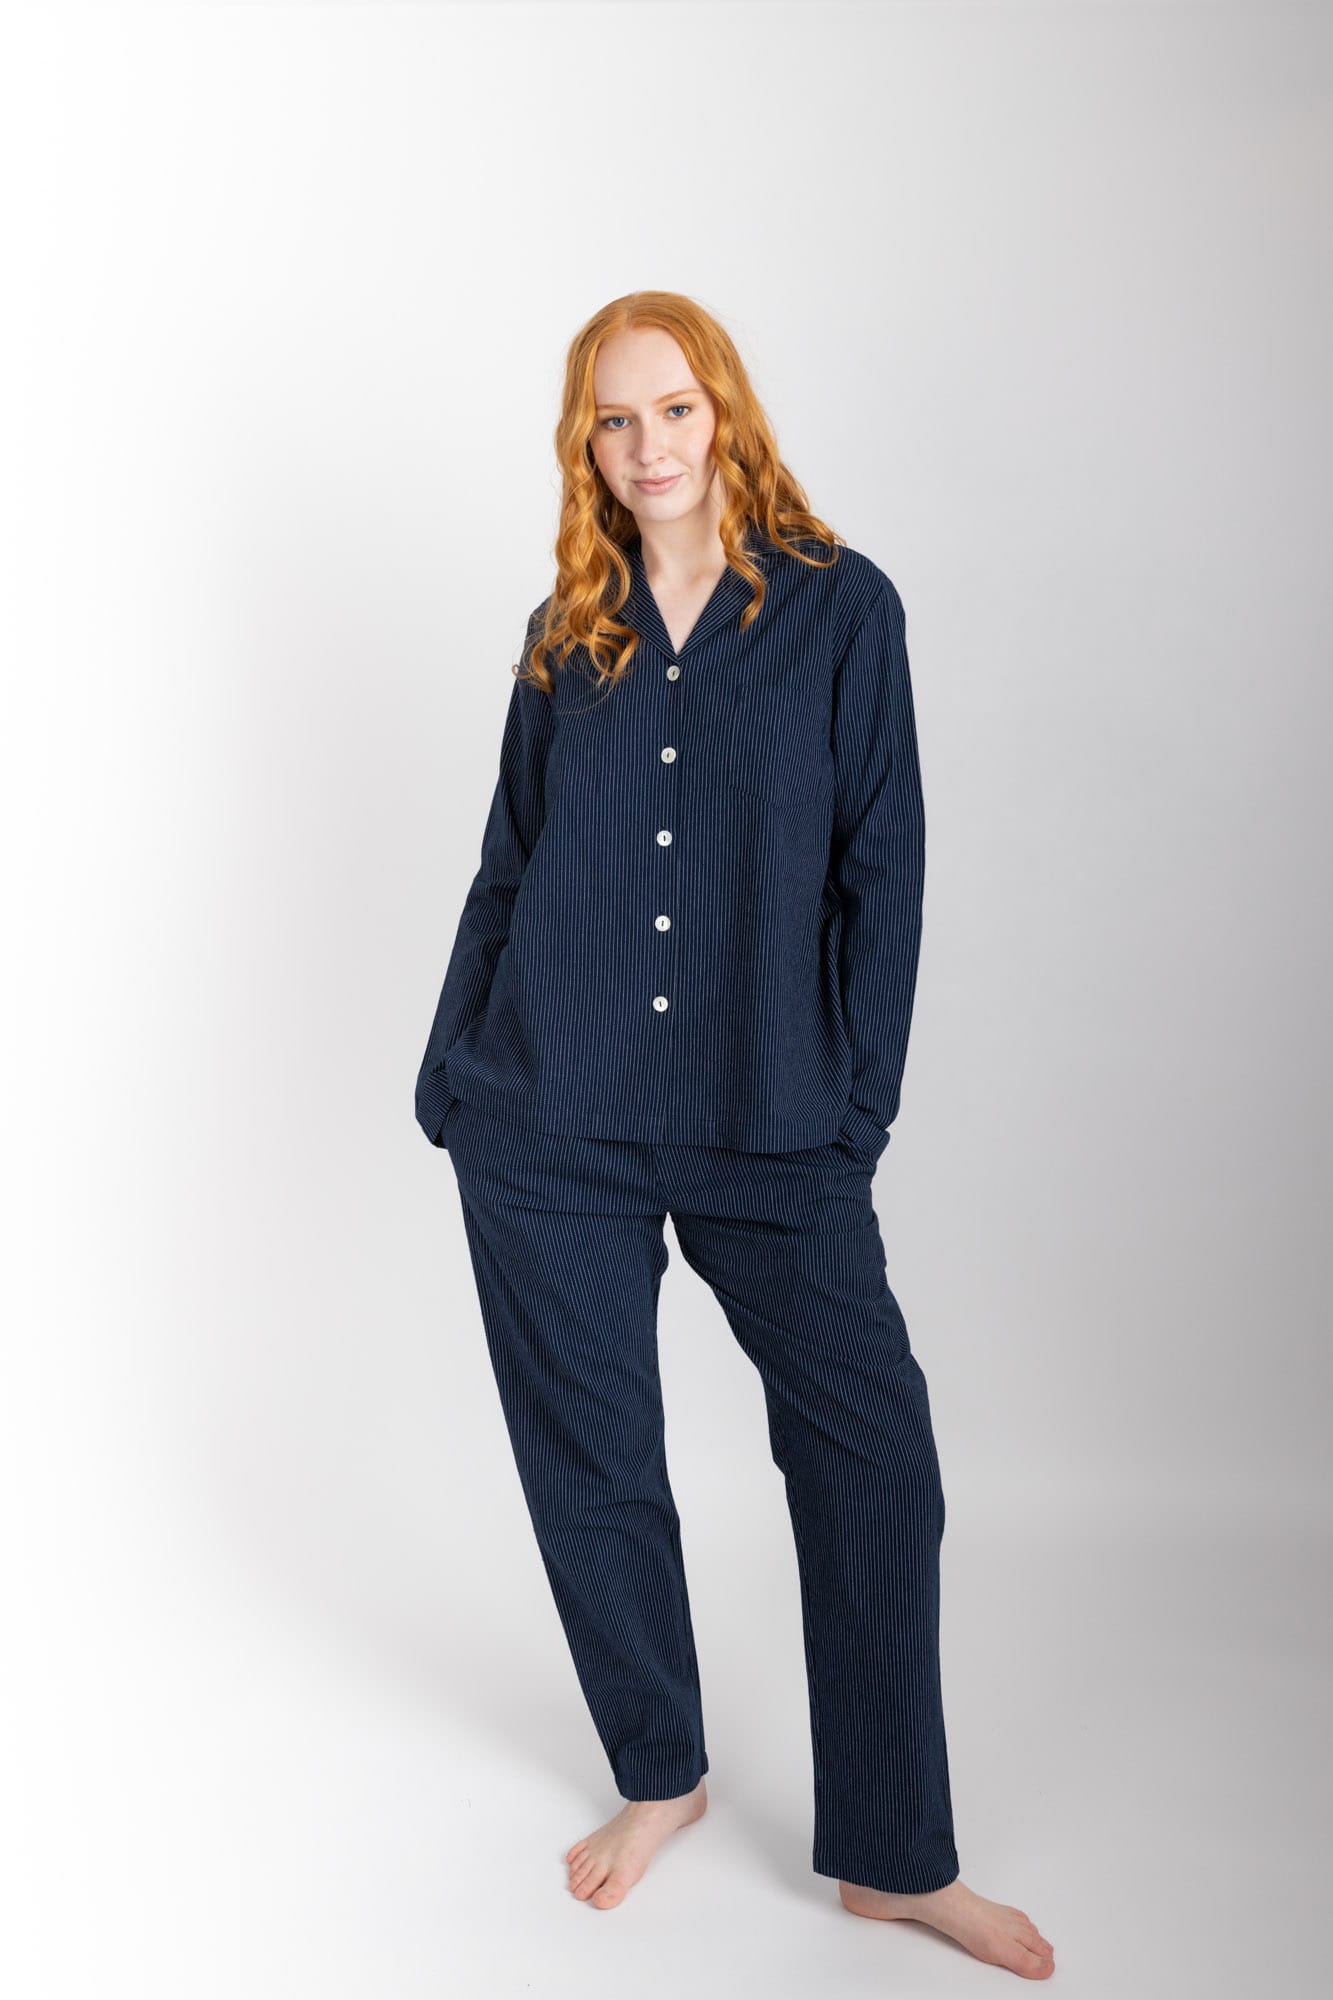 Women’s pyjama set including a long sleeve shirt and long sleeve pants. Made from organic cotton, in a Navy pinstripe.  The shirt has shell buttons, a front pocket and a back pleat.  The pants feature an elasticated waistband for comfort.